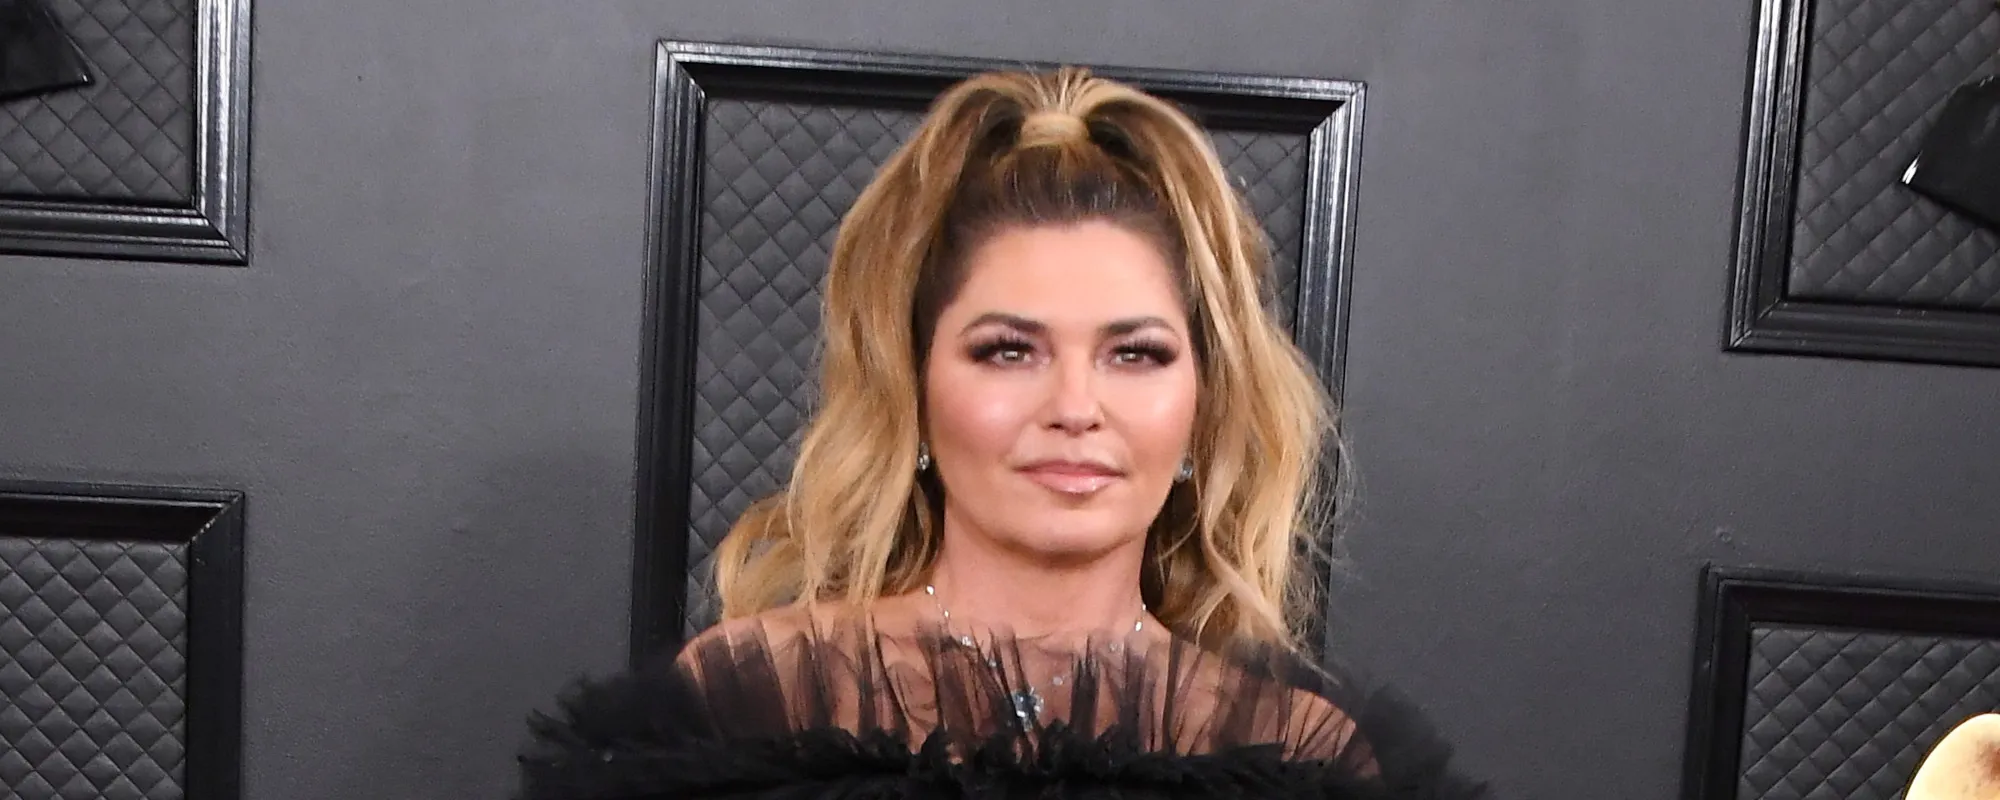 Shania Twain Shares Memorable Dinner with Oprah That “Went Sour” for a Moment